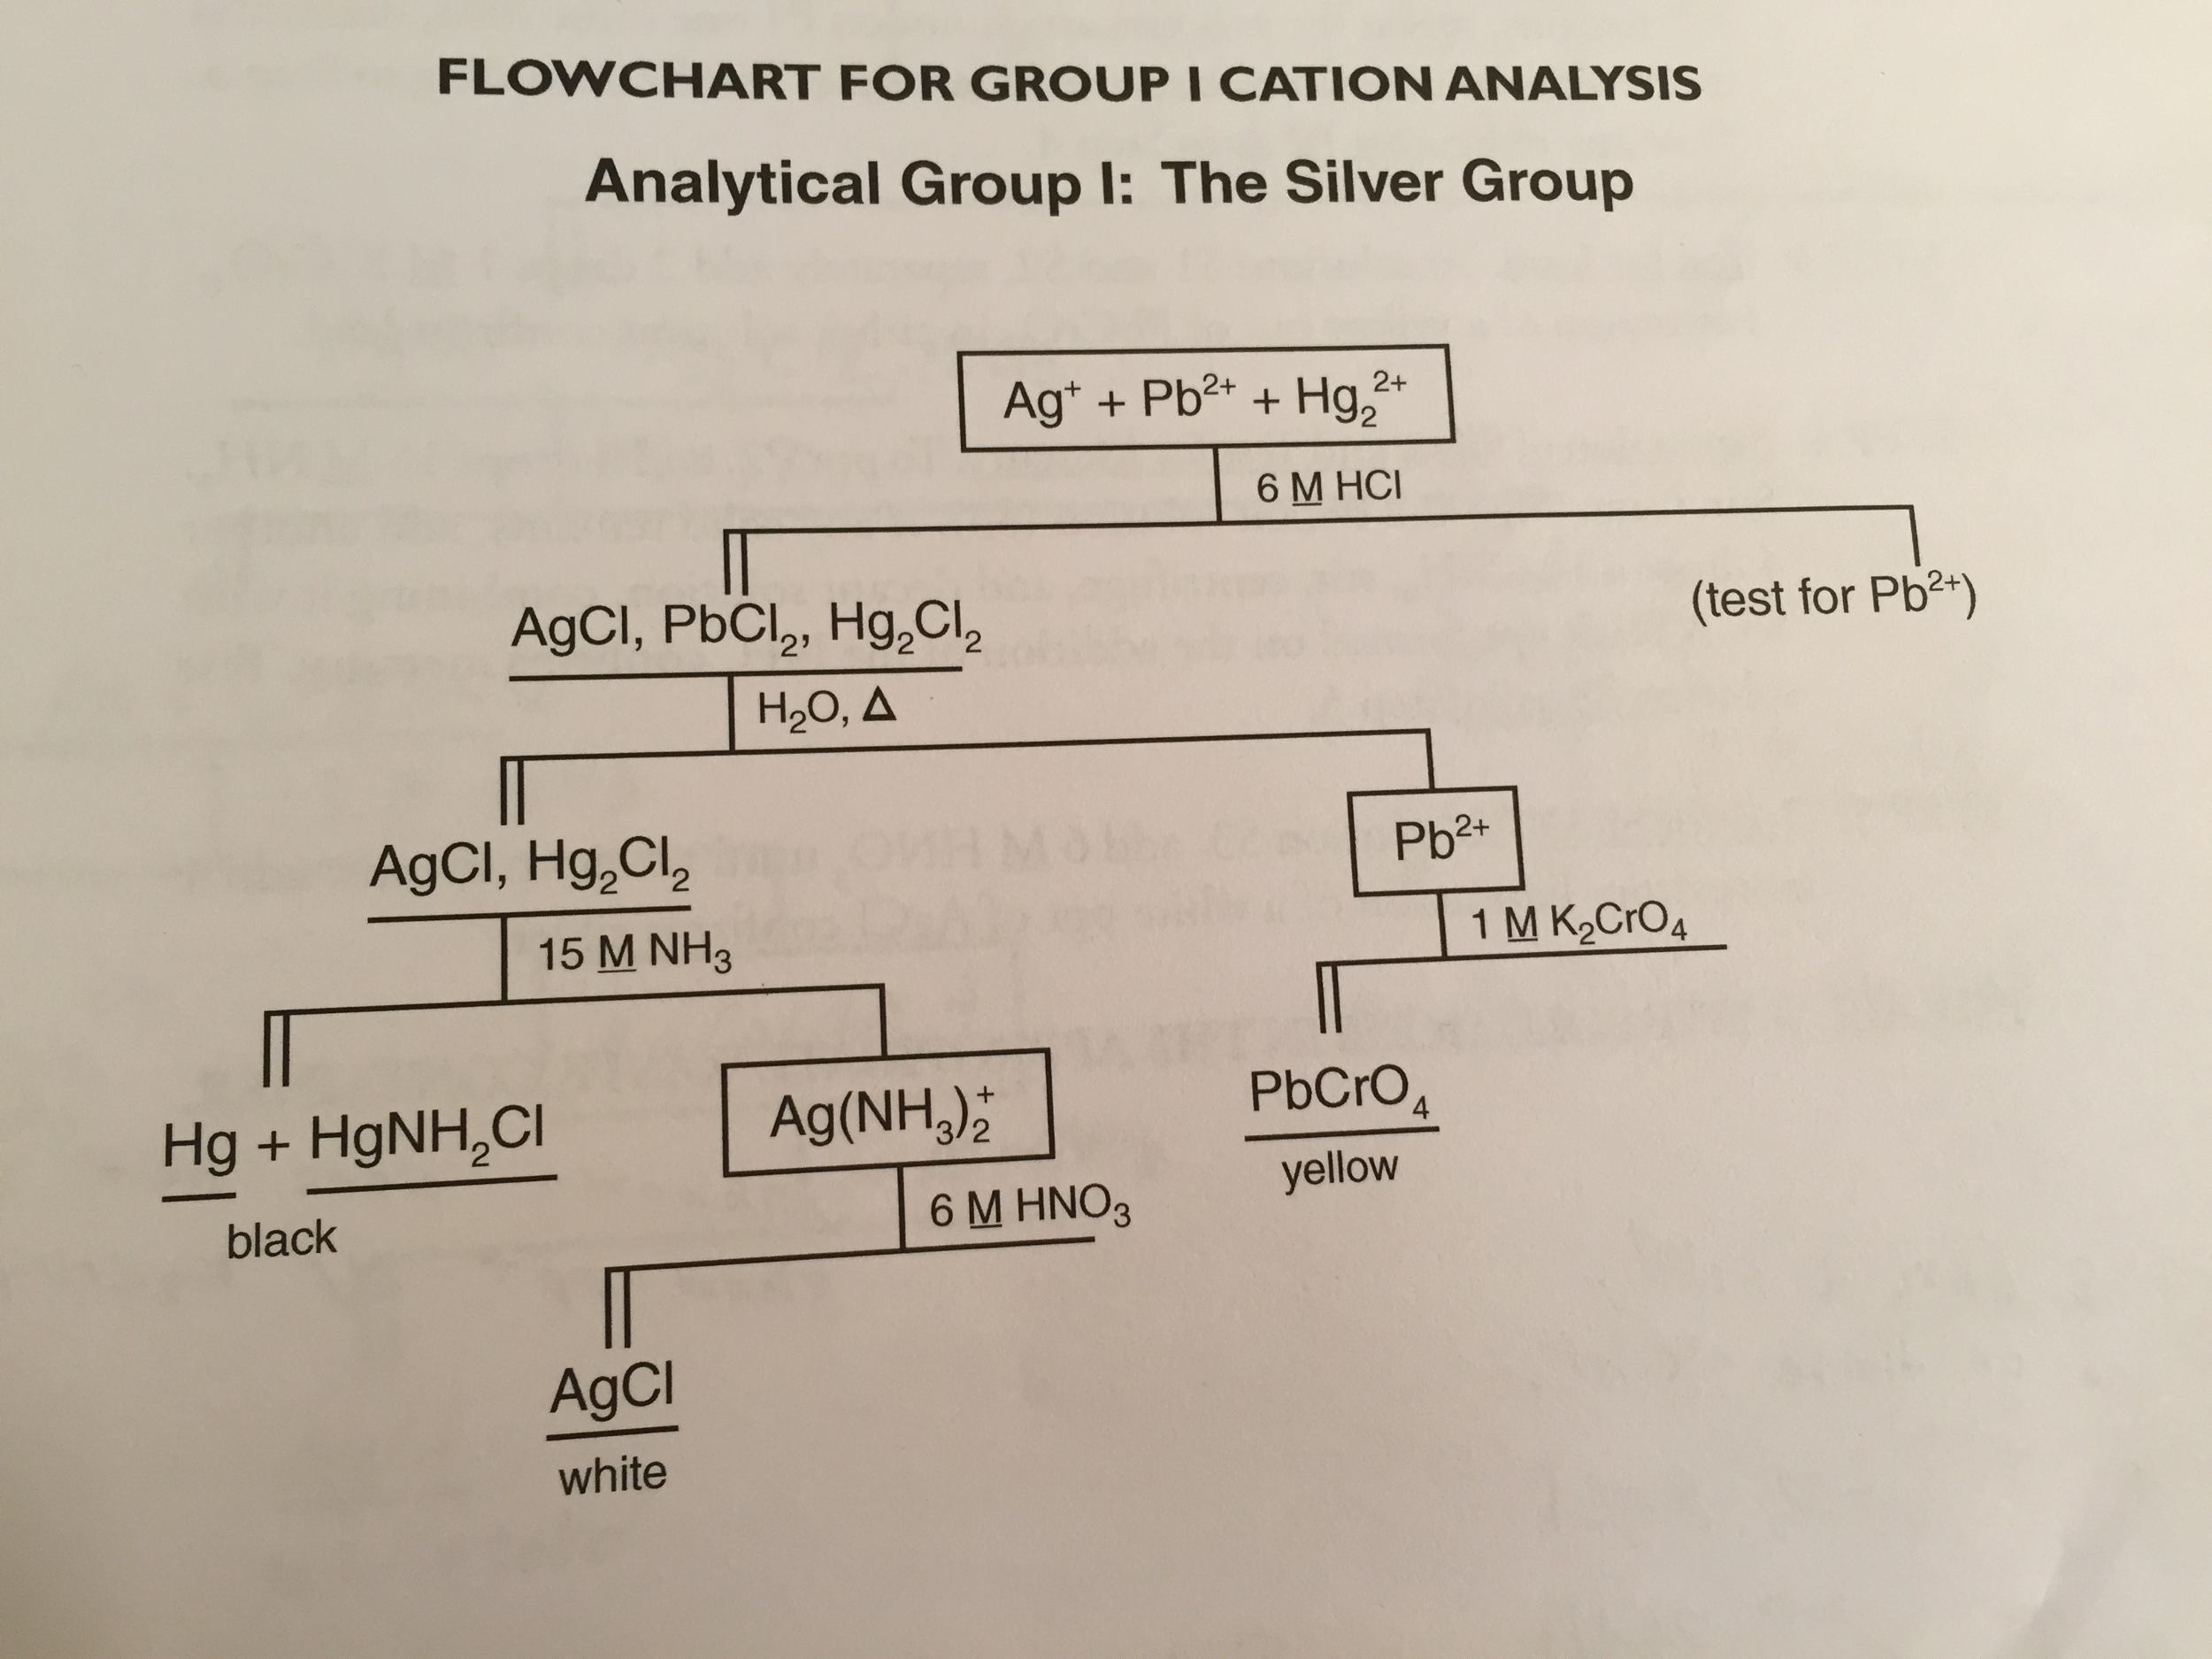 Group 1 Cations Flow Chart